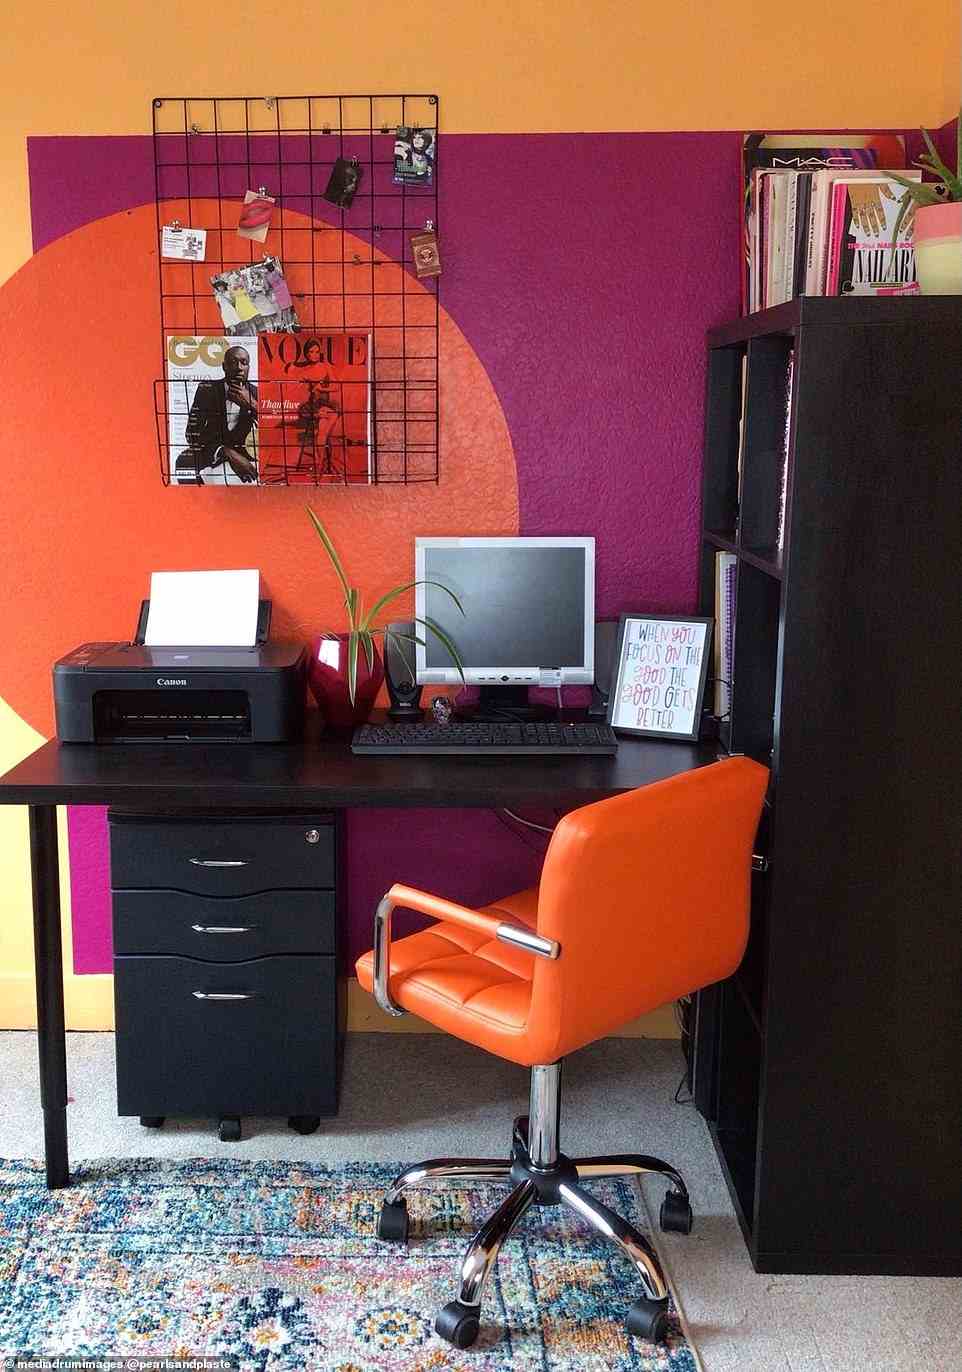 Adding bright bursts of colour, like this orange chair and the painted wall detail, means the same desk and shelving has been given a new lease of life